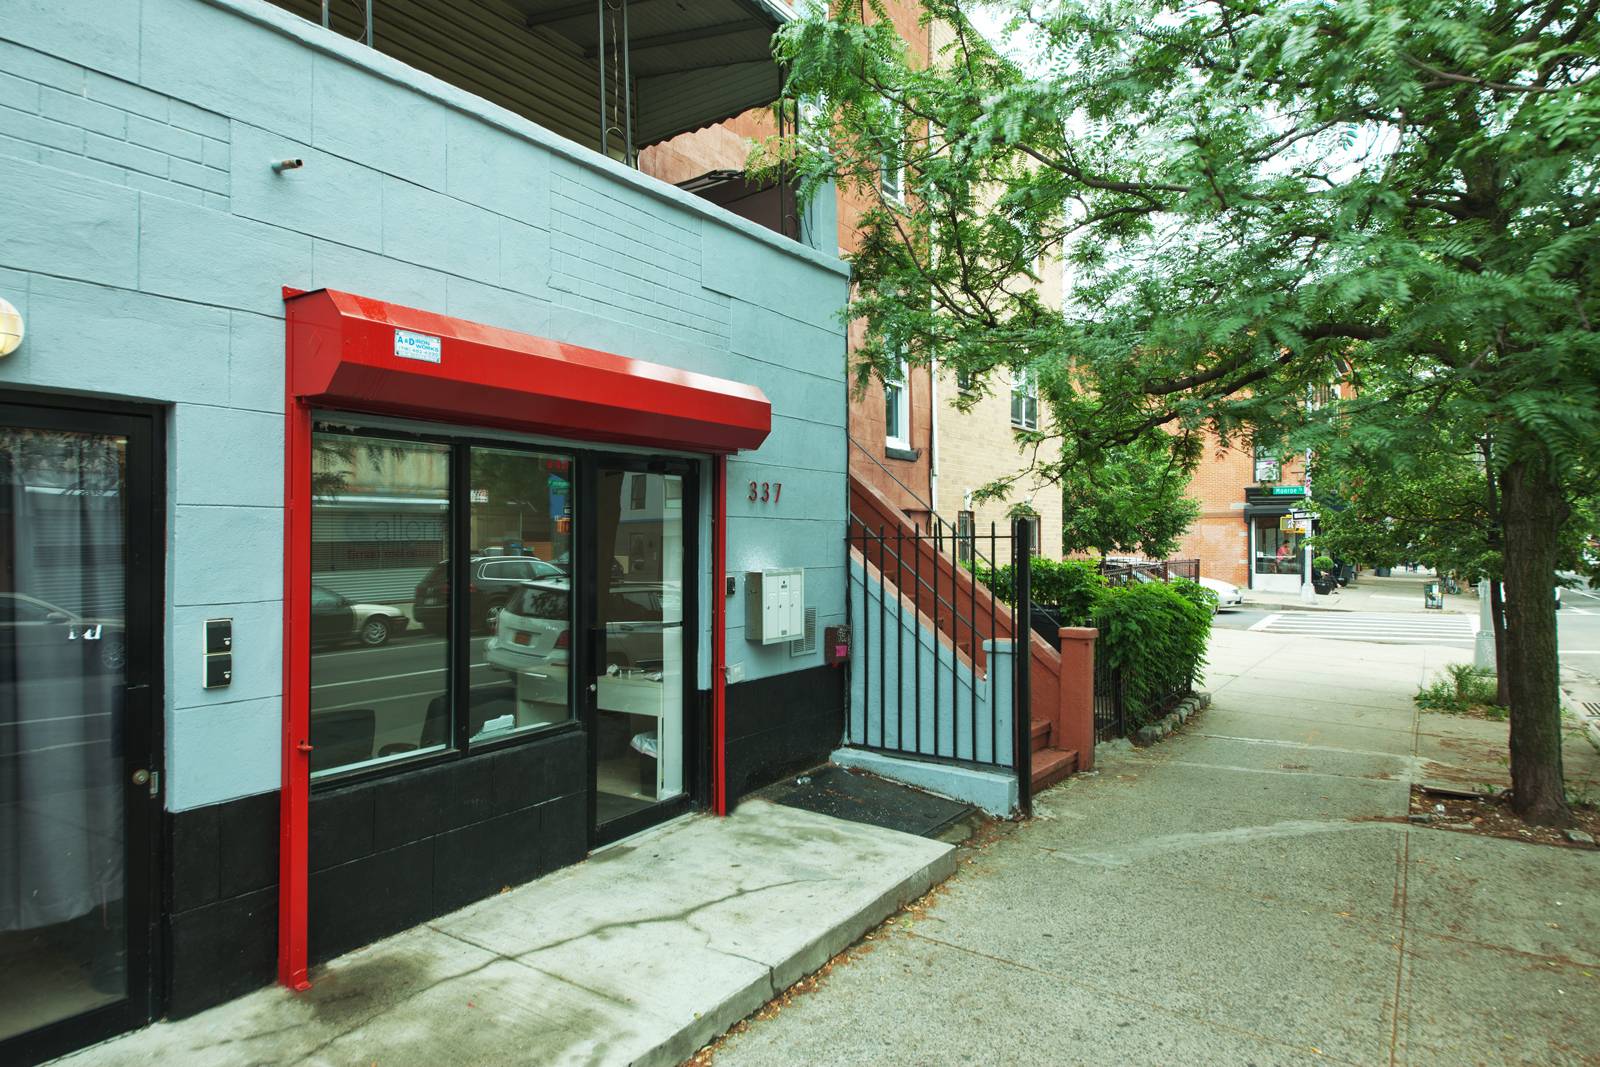 Vacant Retail Space with full basement & Back Yard / Ideal for Wine Bar, Restaurant, Cafe use!